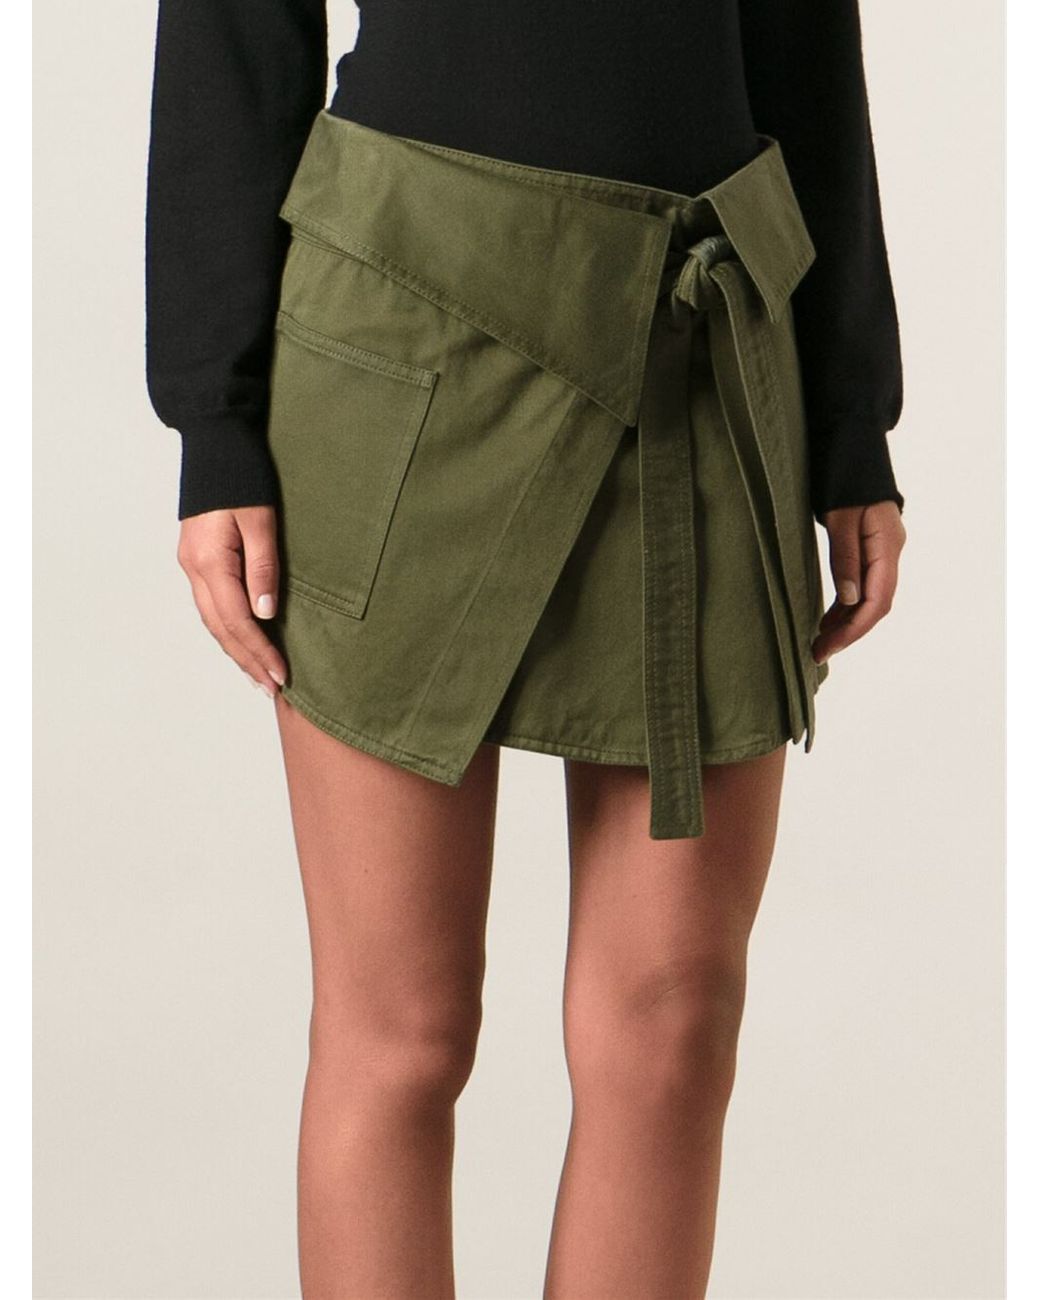 Isabel Marant Wrap Military Skirt in Natural | Lyst